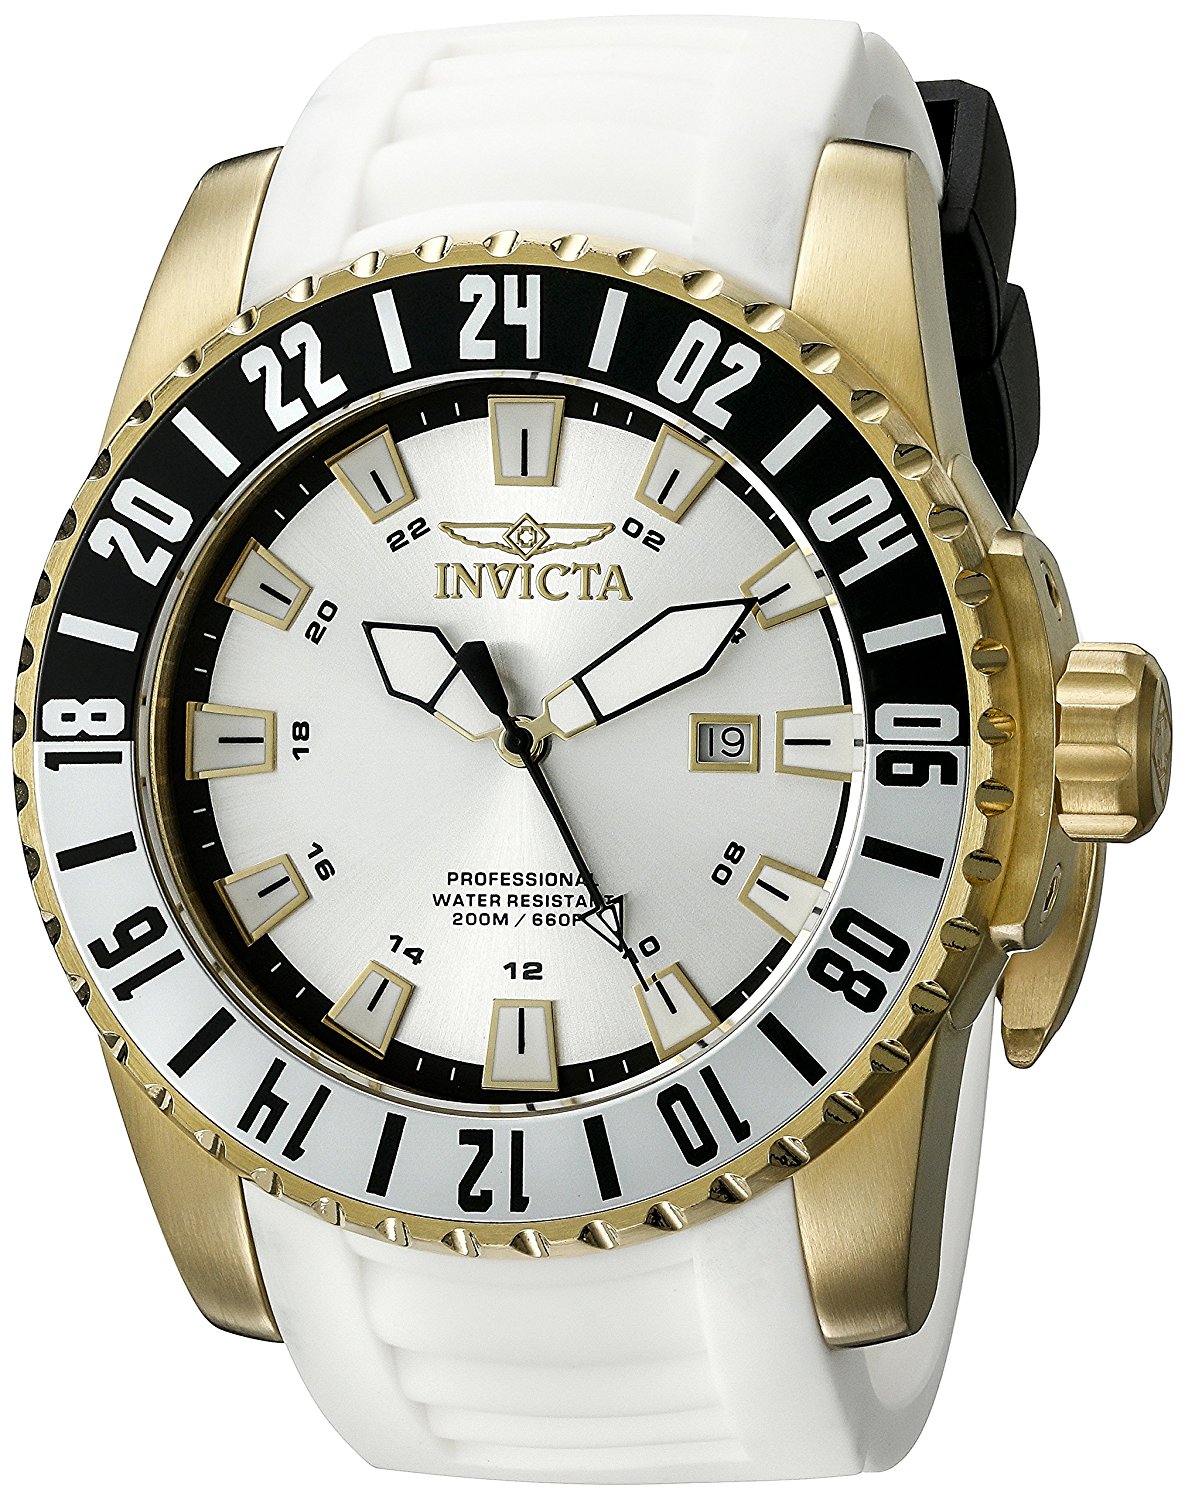 Invicta Silver Dial Stainless Steel Band Watch #19683 (Men Watch)